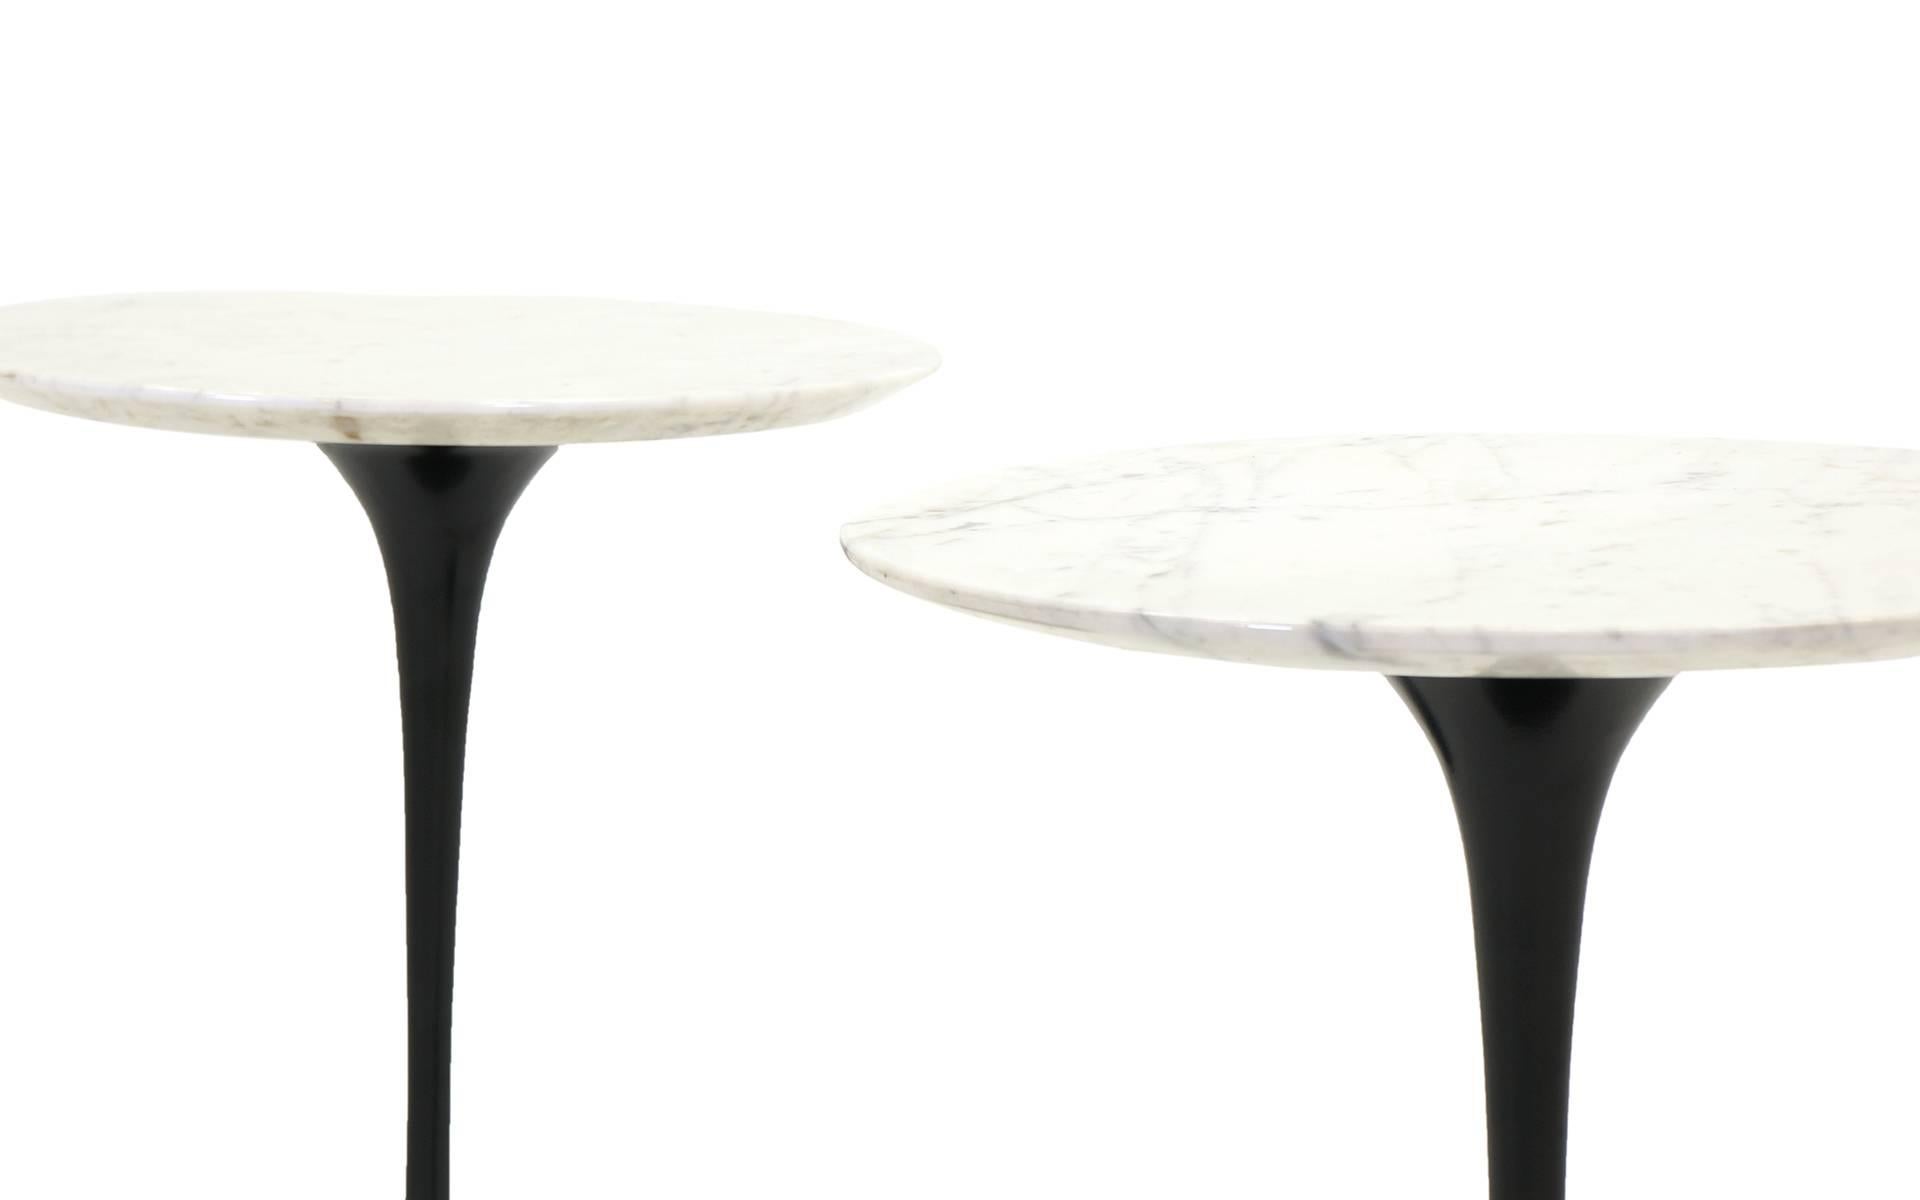 American Excellent pair of Saarinen for Knoll side tables Black base with marble top